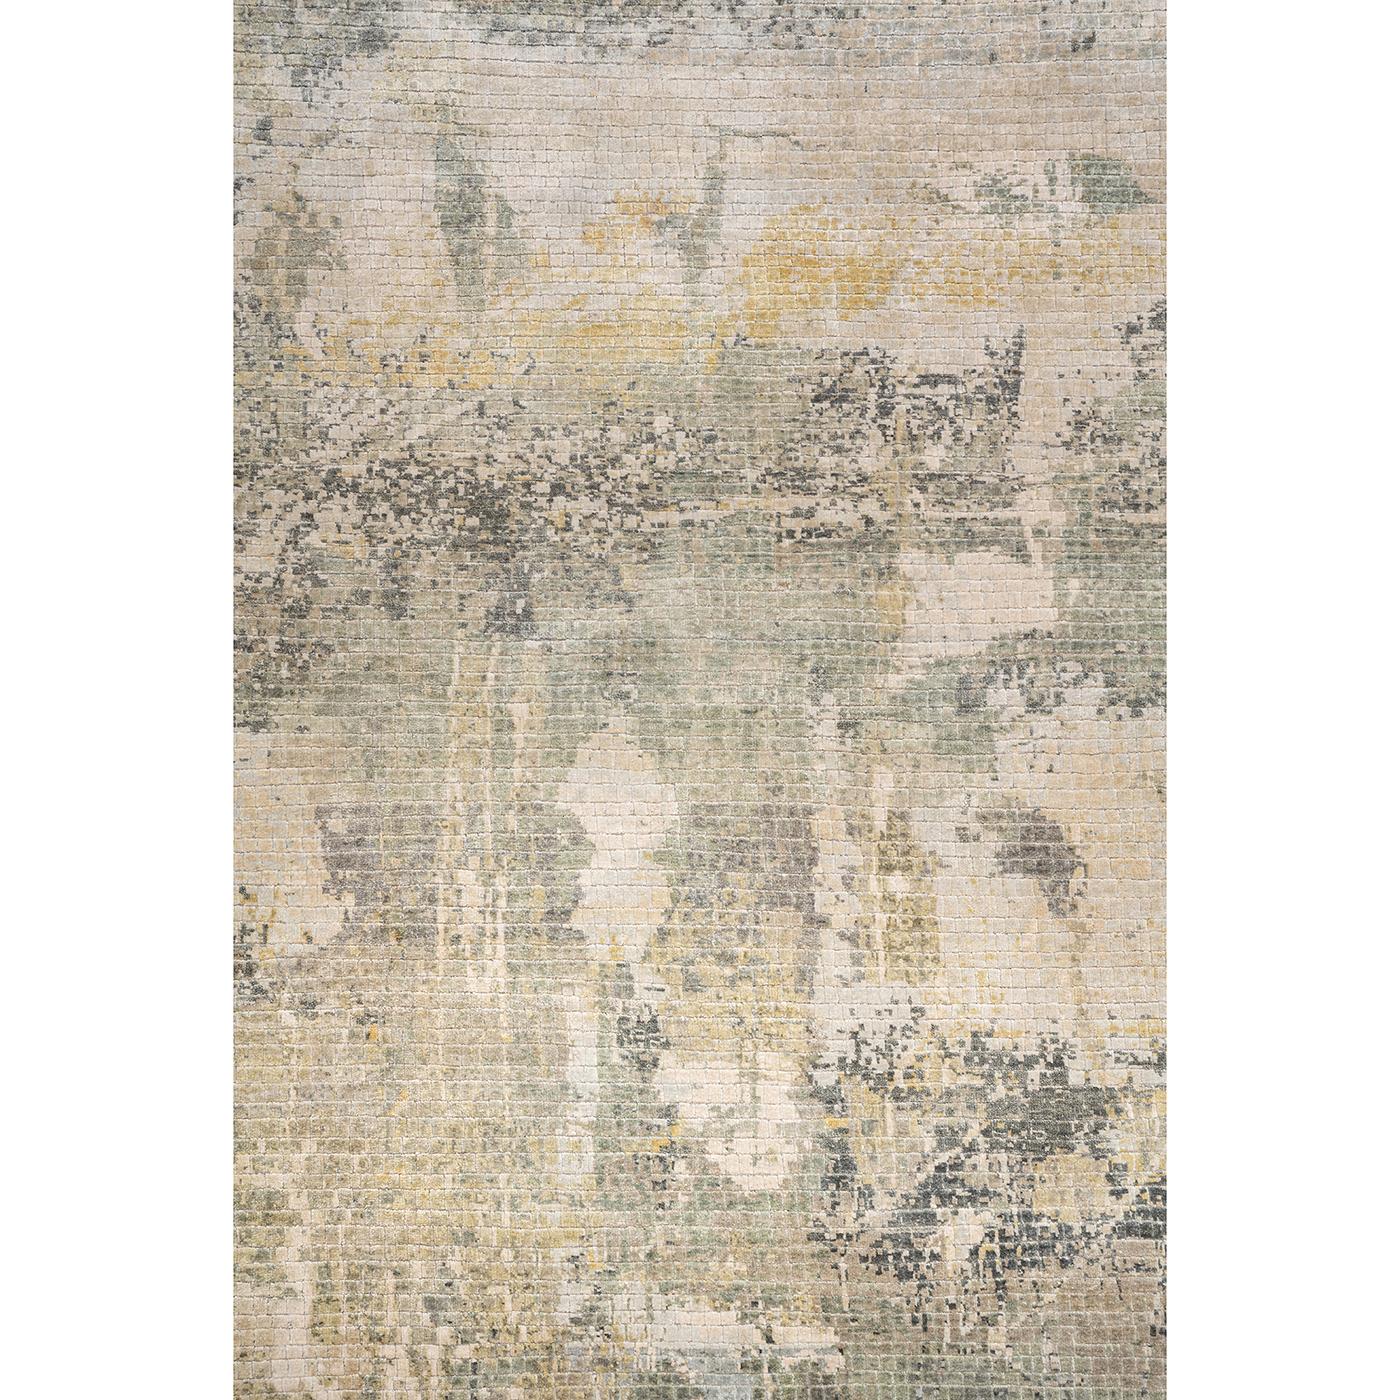 An exquisite accessory, this Clouds Mosaic Rug is crafted in India with the Iranian 10 by 10 knotting technique (100 knots per square inch). With the pile in pure 100% Chinese silk, and the warp and weft in cotton, the coloring in this version